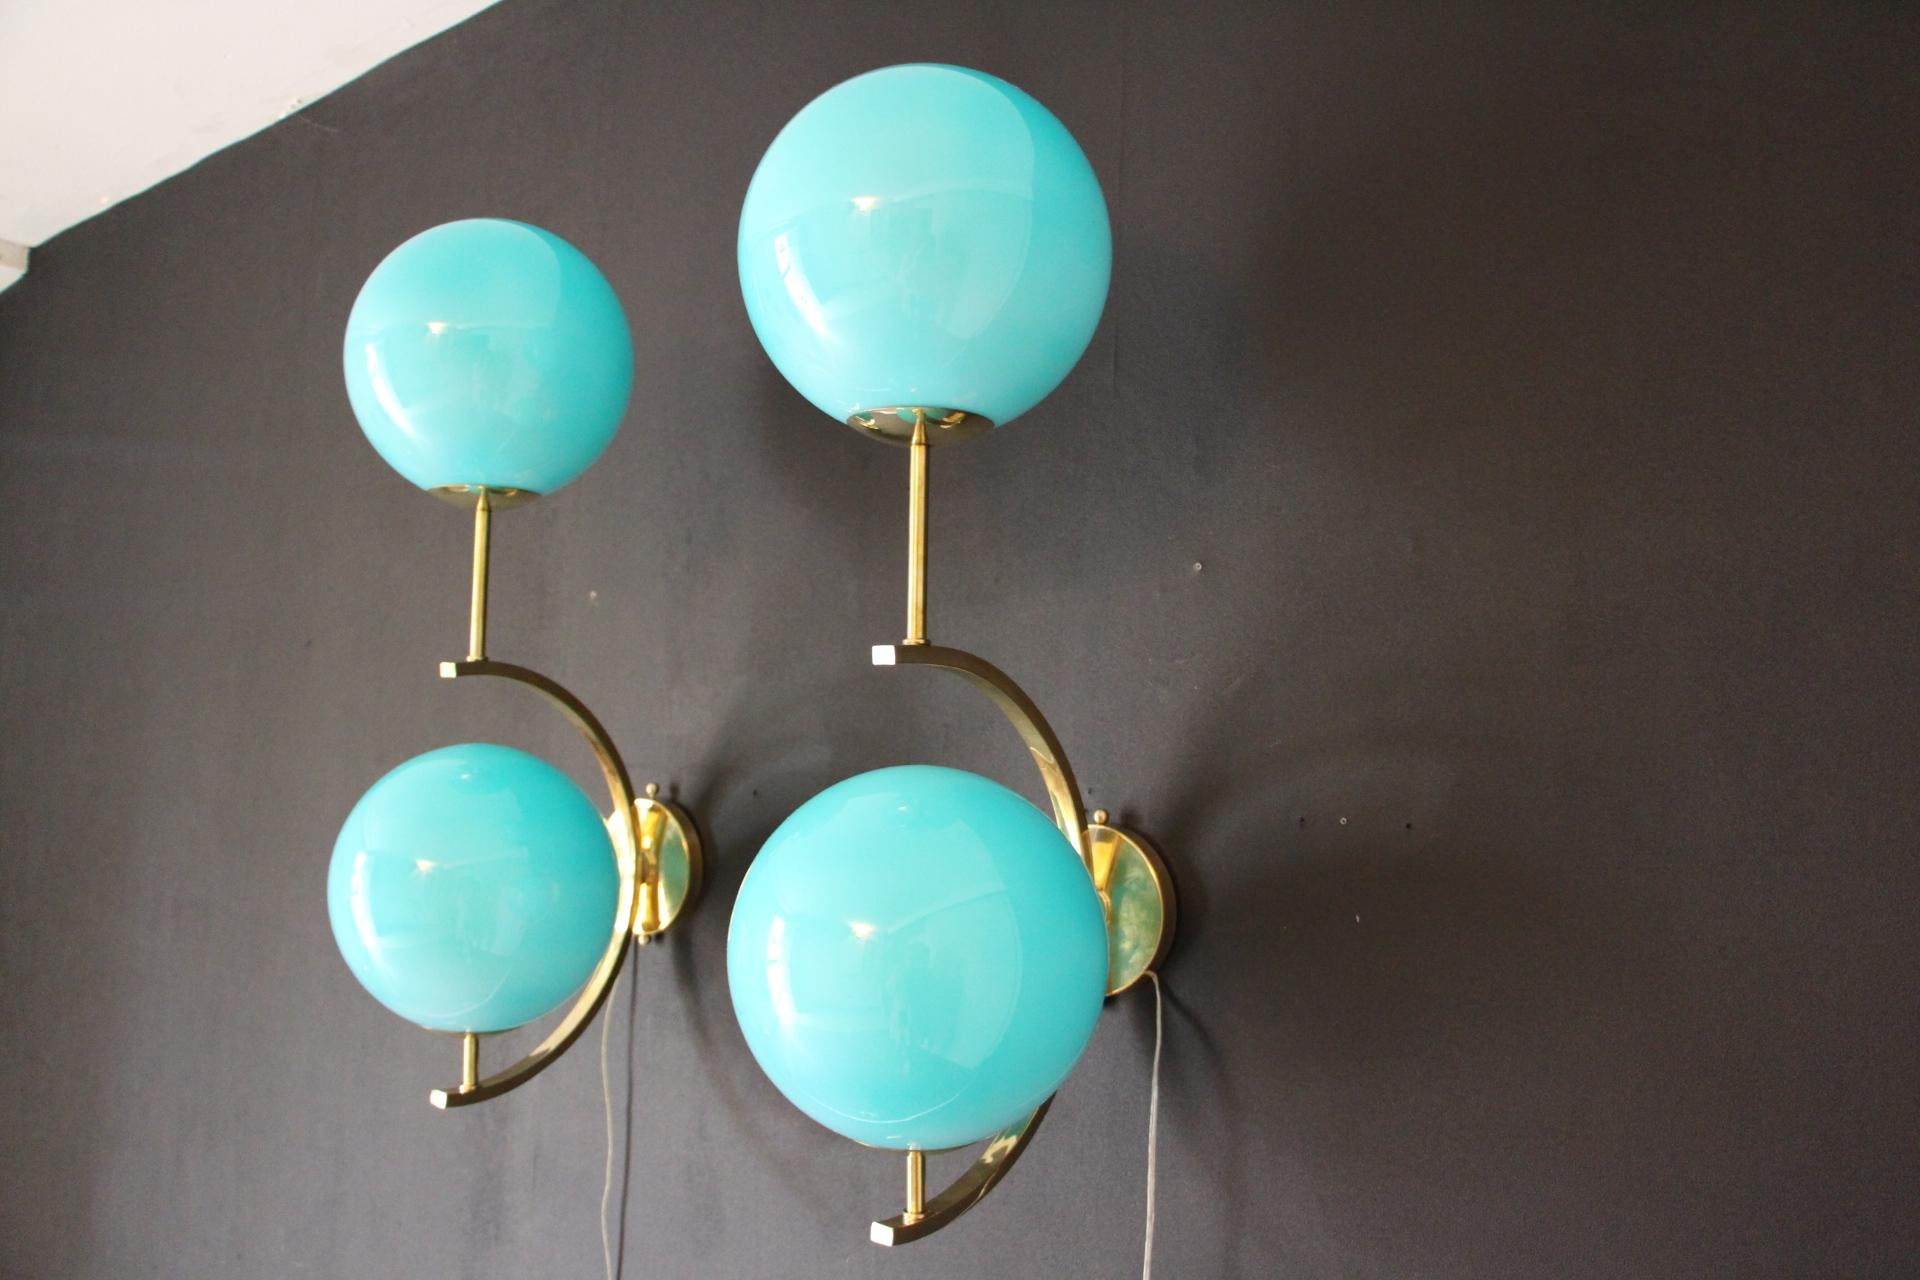 20th Century Modern Midcentury Pair of Brass and Turquoise Blue Glass Sconces, Wall Lights For Sale